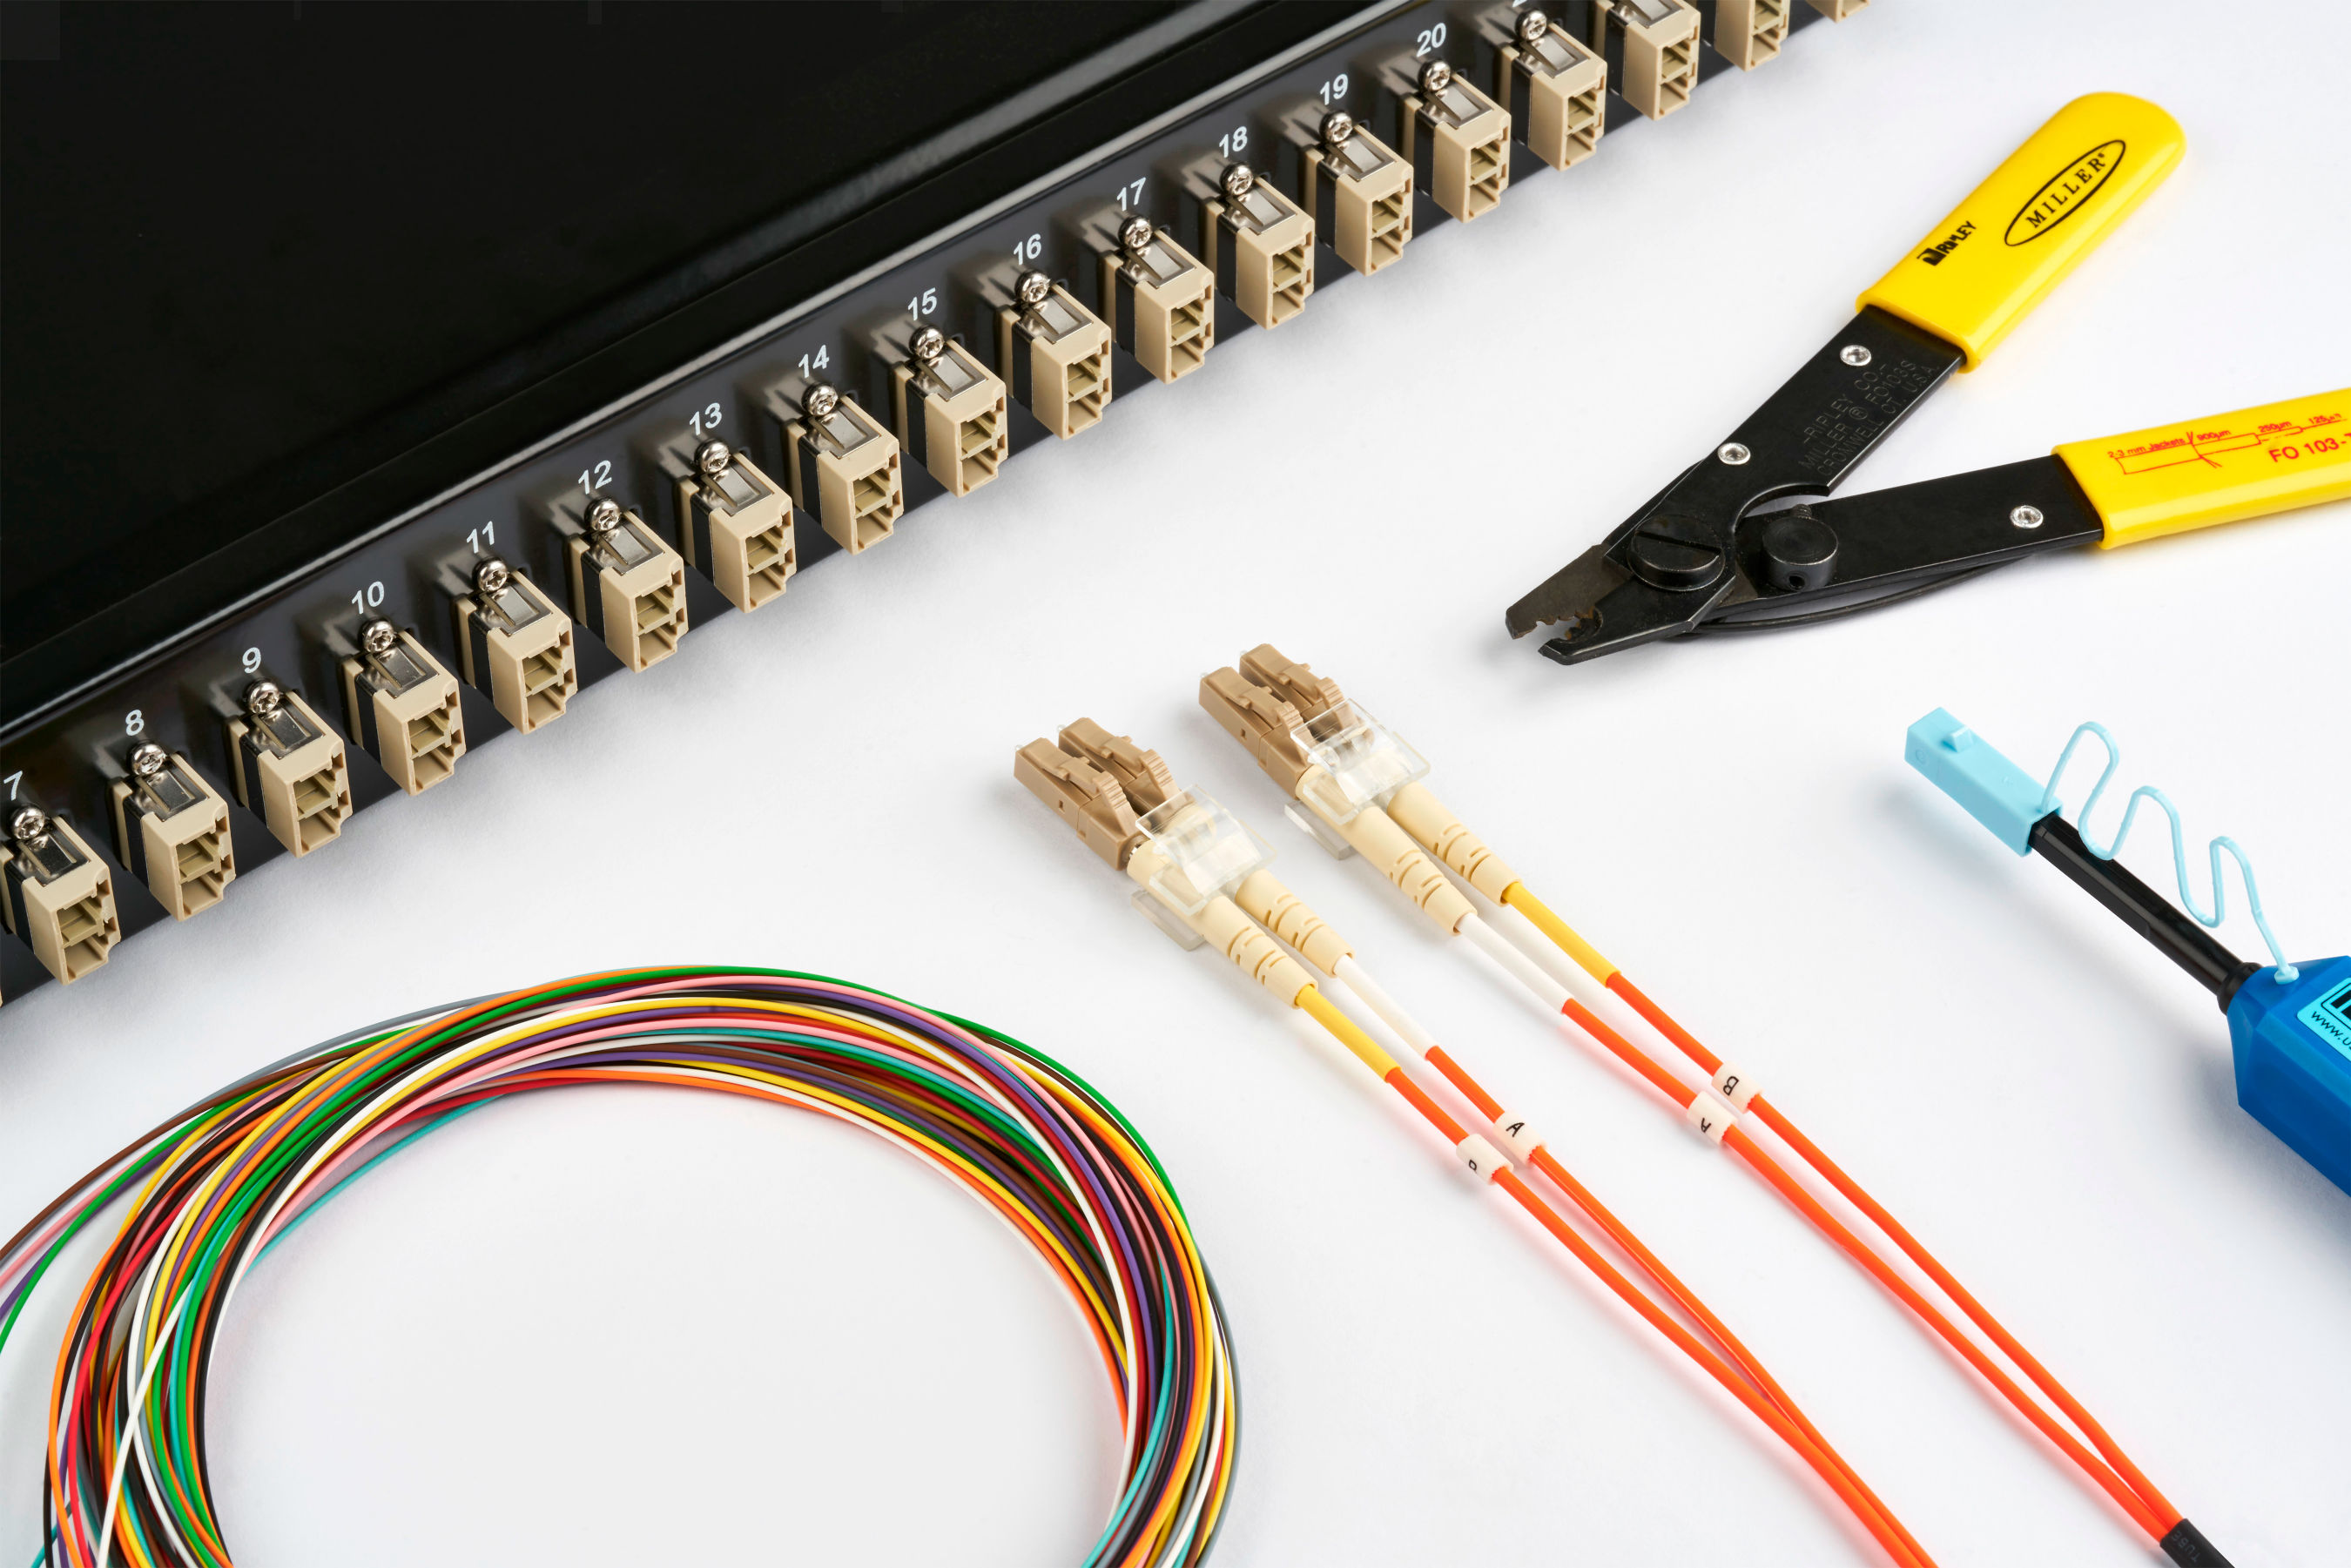 Network components and tools, including a patch panel, fiber optic patch cables, colored cables and a stripping tool.